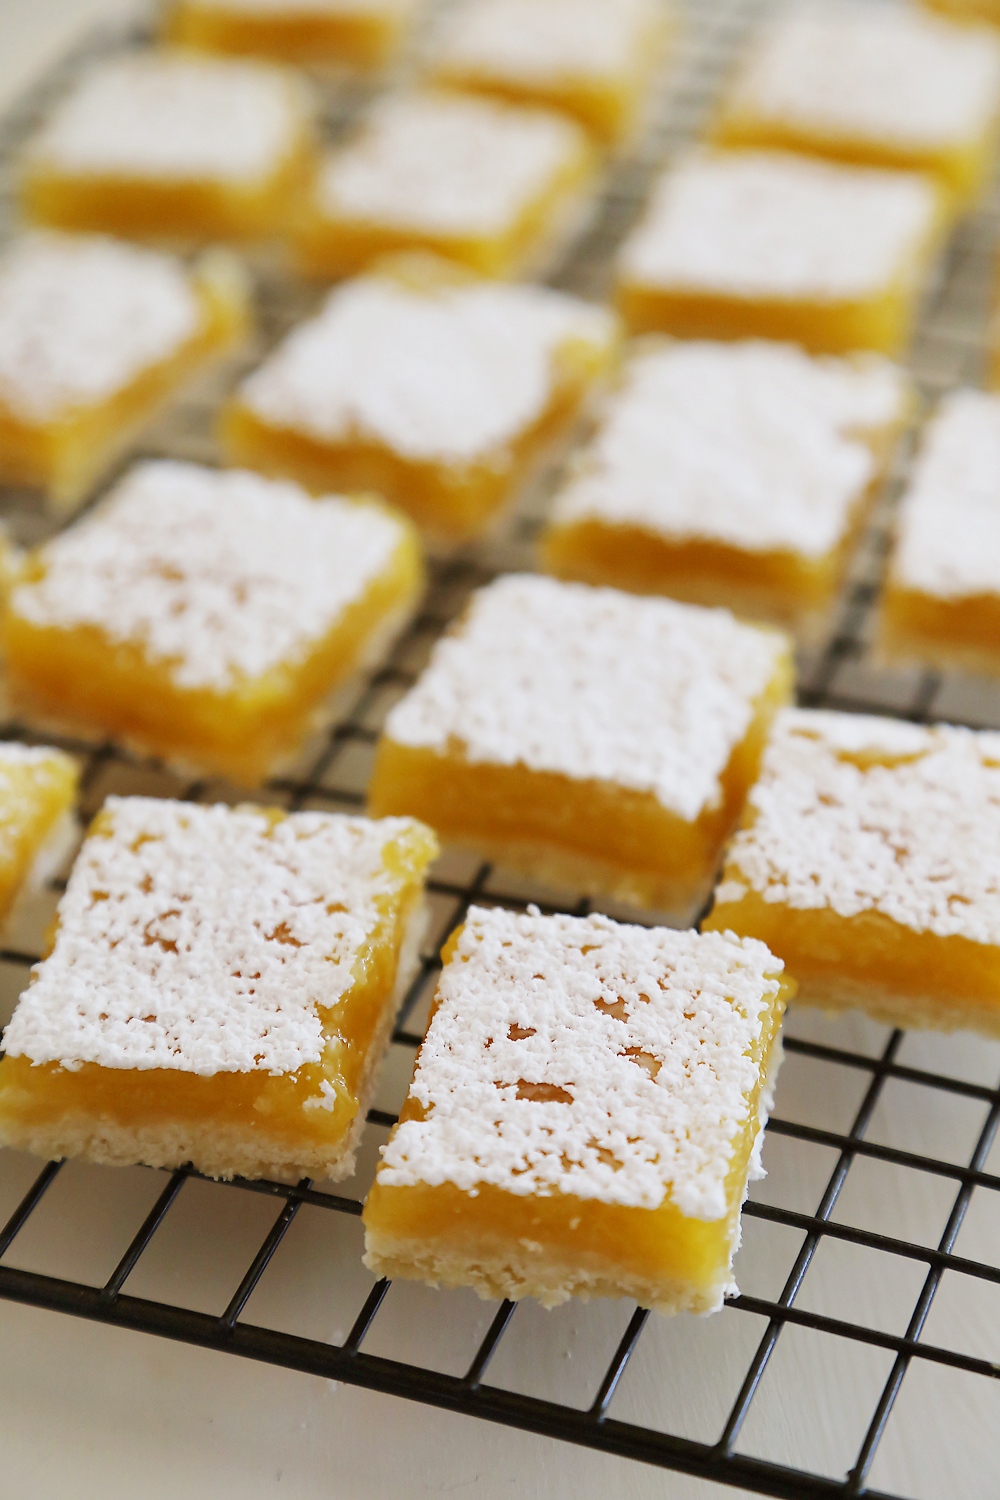 Best Ever Lemon Bars - Made easily 100% from scratch with all-natural ingredients. So easy, sweet and tangy! thecomfortofcooking.com